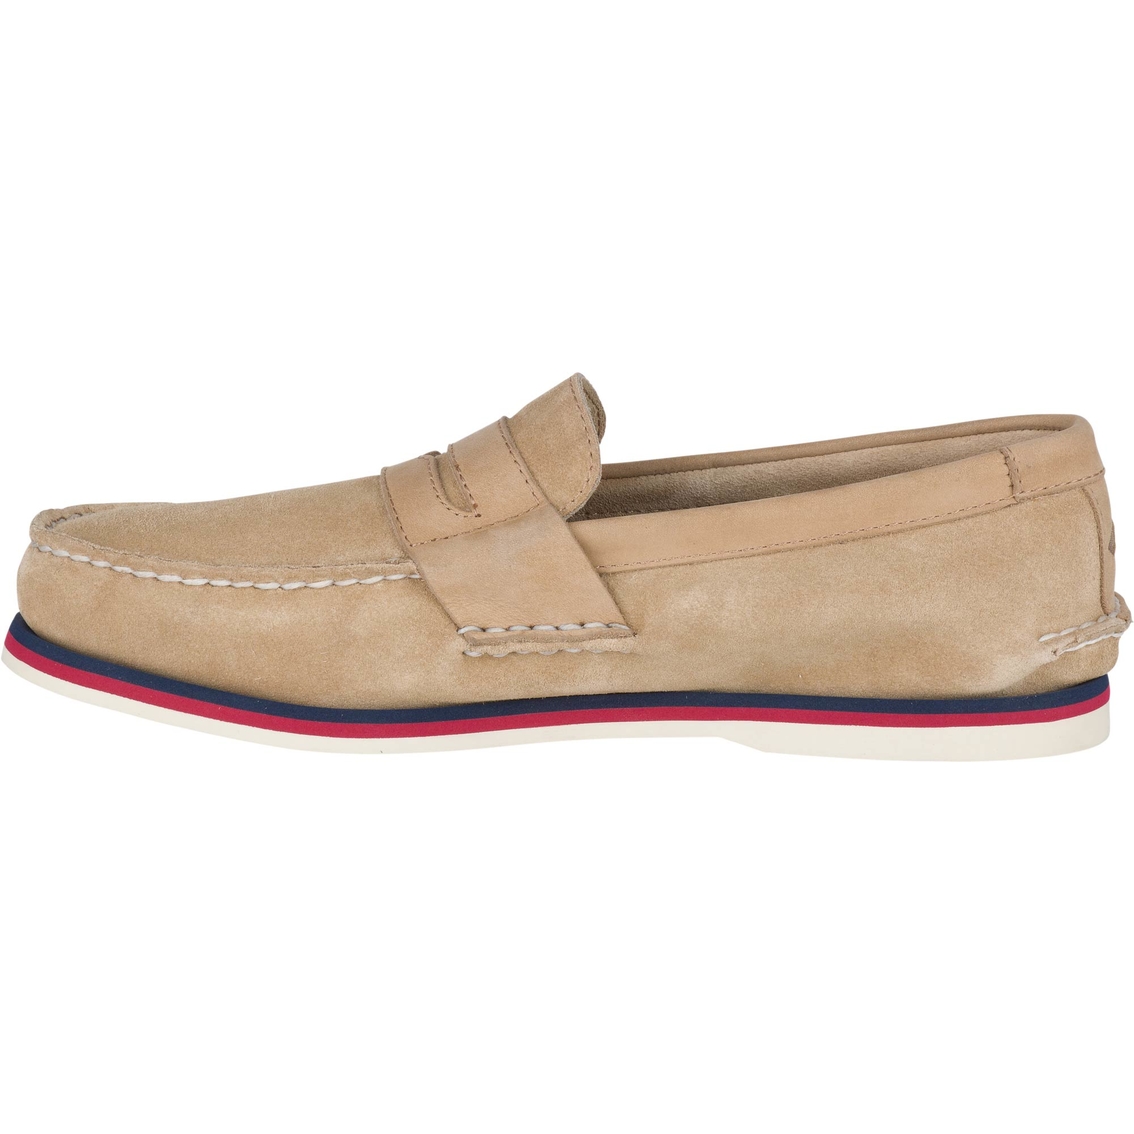 Sperry AO Penny Nautical Tan Loafers - Image 2 of 4